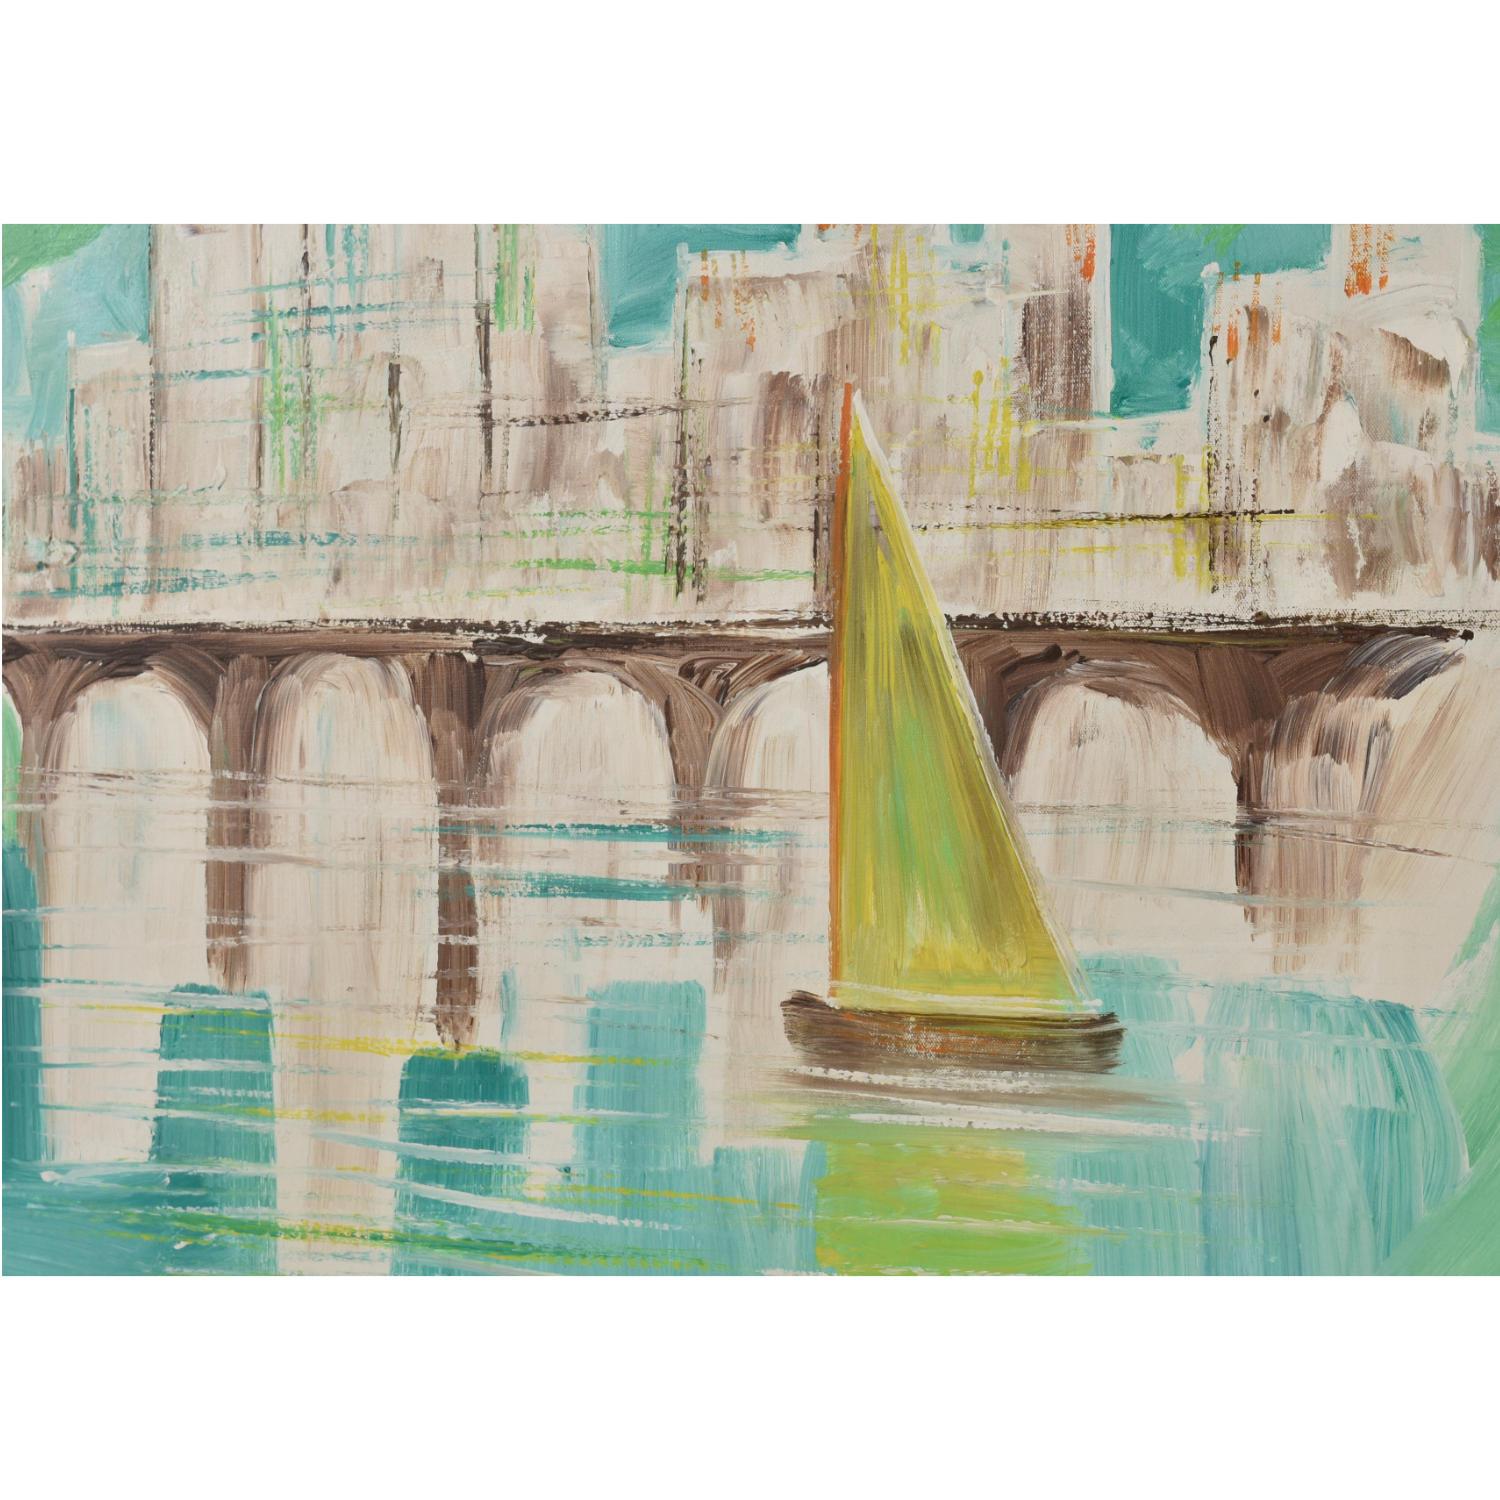 Late 20th Century Mid-Century Modern Aqua Blue White and Green Nautical Harbor Painting For Sale